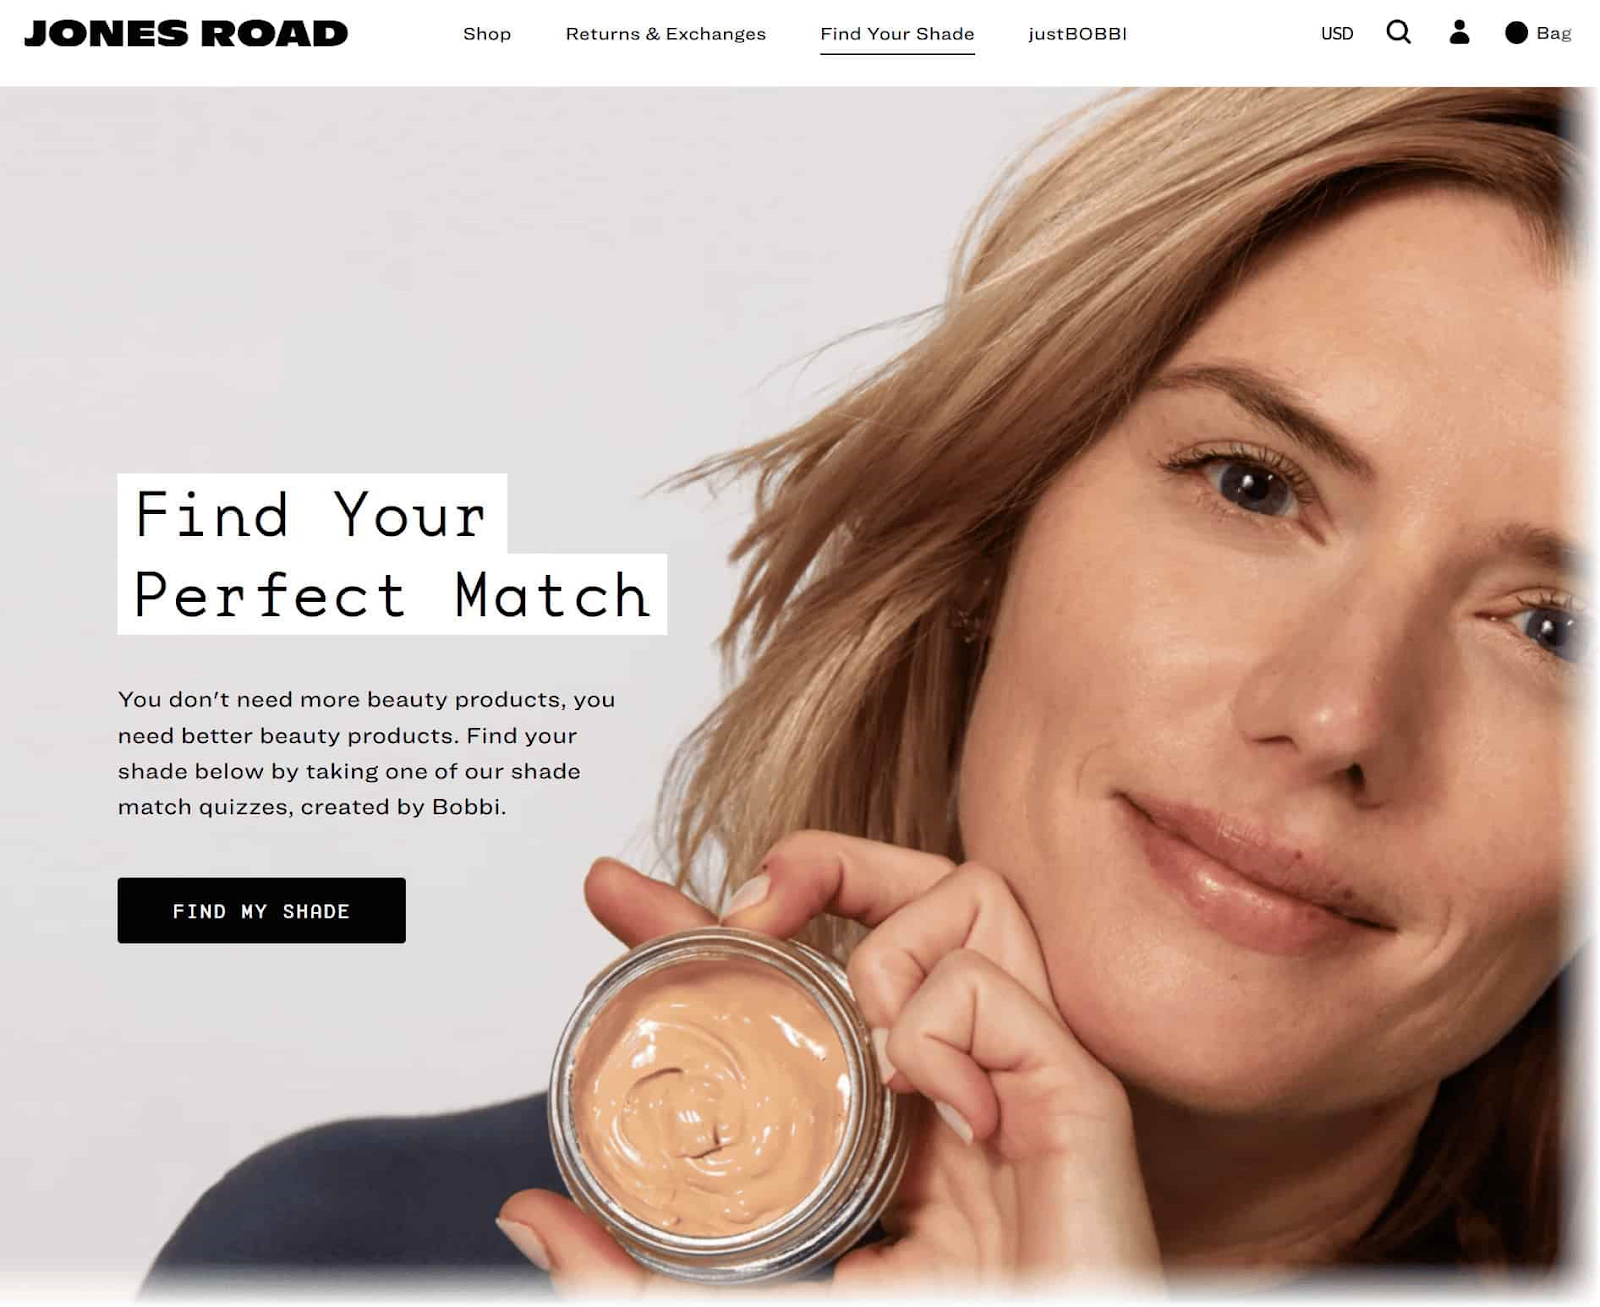 Jones Road's "Find Your Shade" landing page